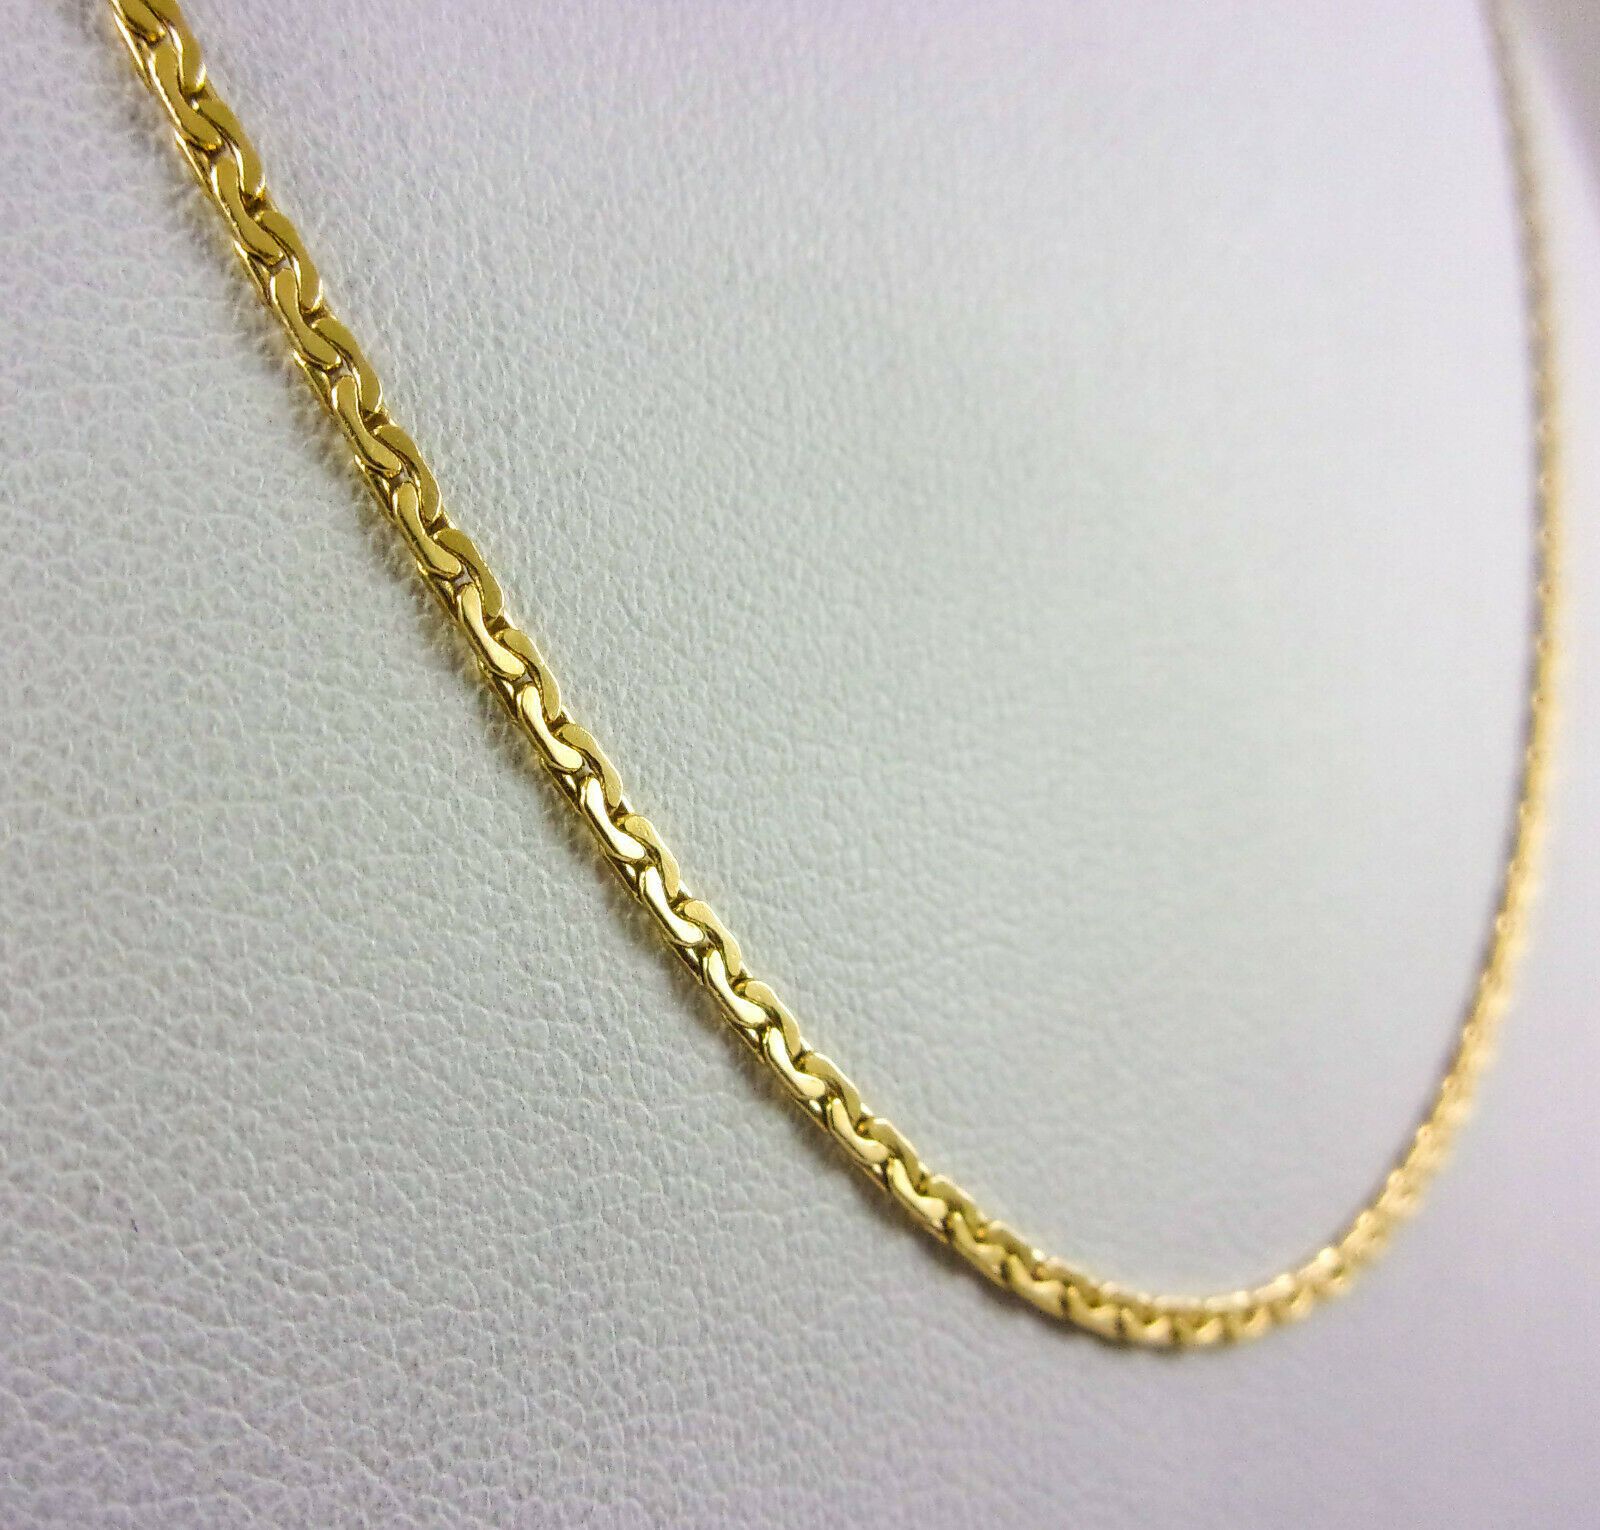 Solid 14k Yellow Gold 16" Tight Cable Link Chain Necklace, 1.5mm,  (View 5 of 25)